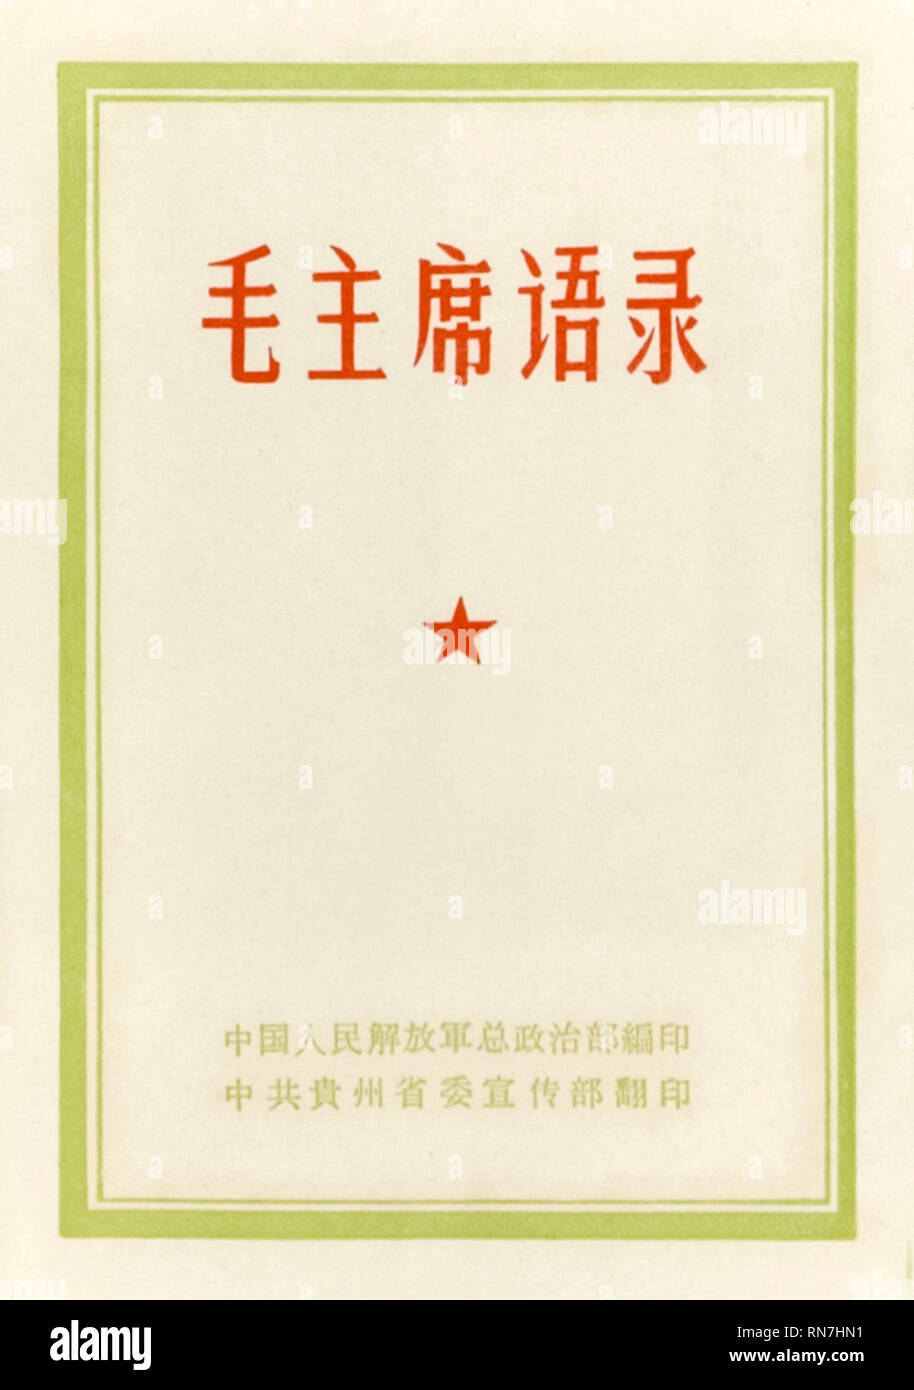 Title page of ‘The Little Red Book’ (Quotations from Chairman Mao Tse-tung) containing statements made by Chairman Mao, Chinese communist revolutionary and founding father of the People's Republic of China, first edition published in 1964. Stock Photo